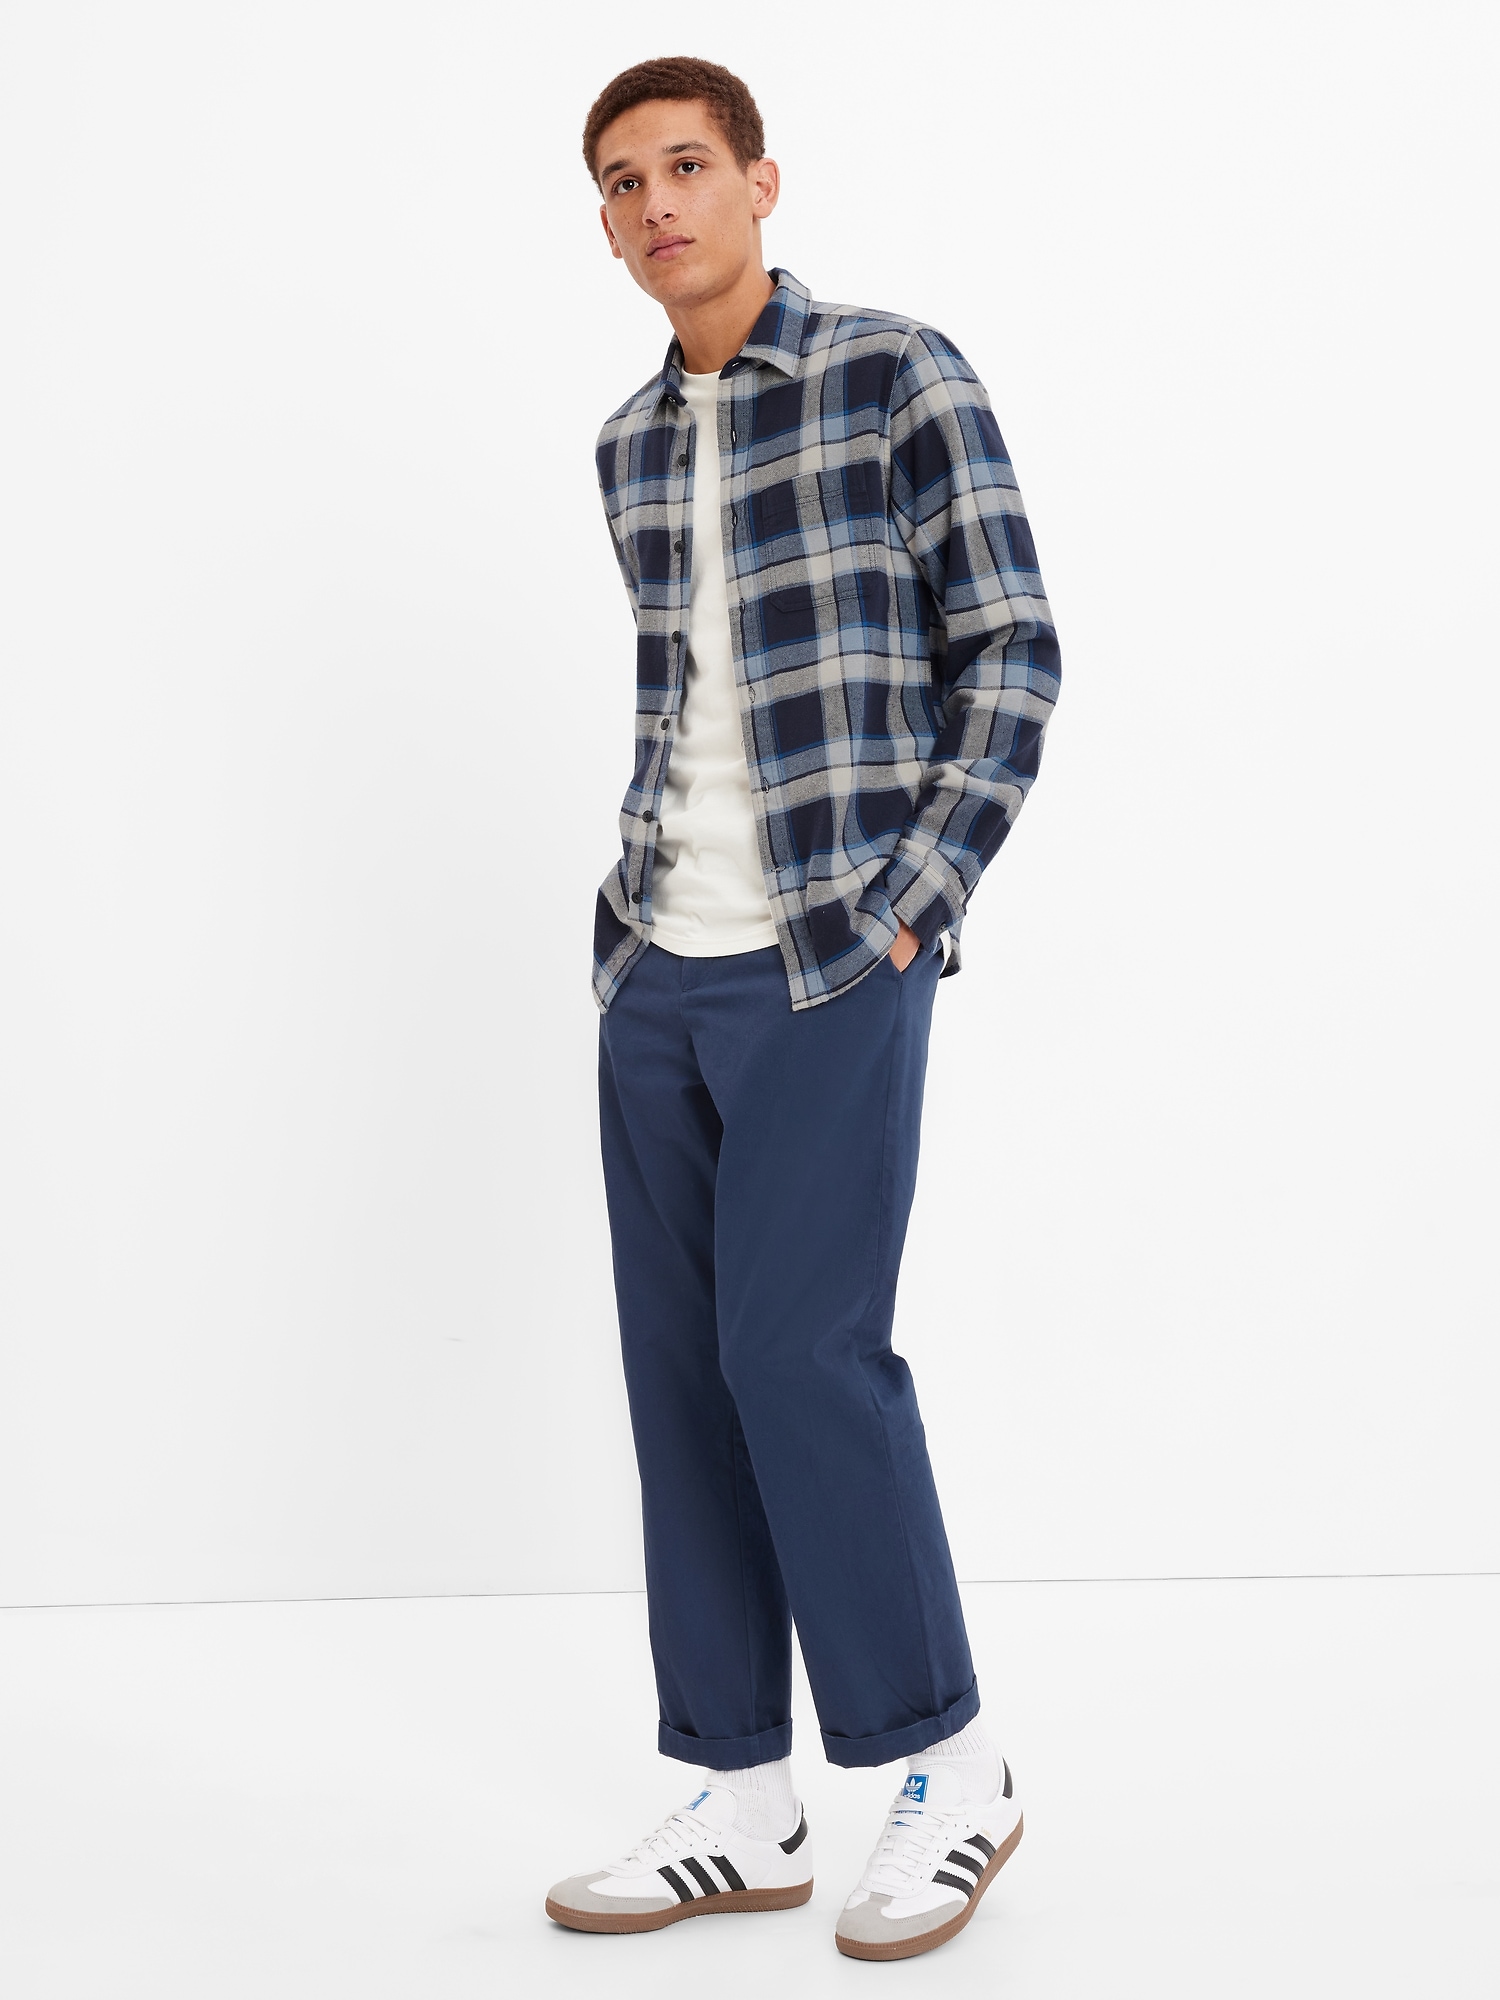 Flannel Shirt in Untucked Fit